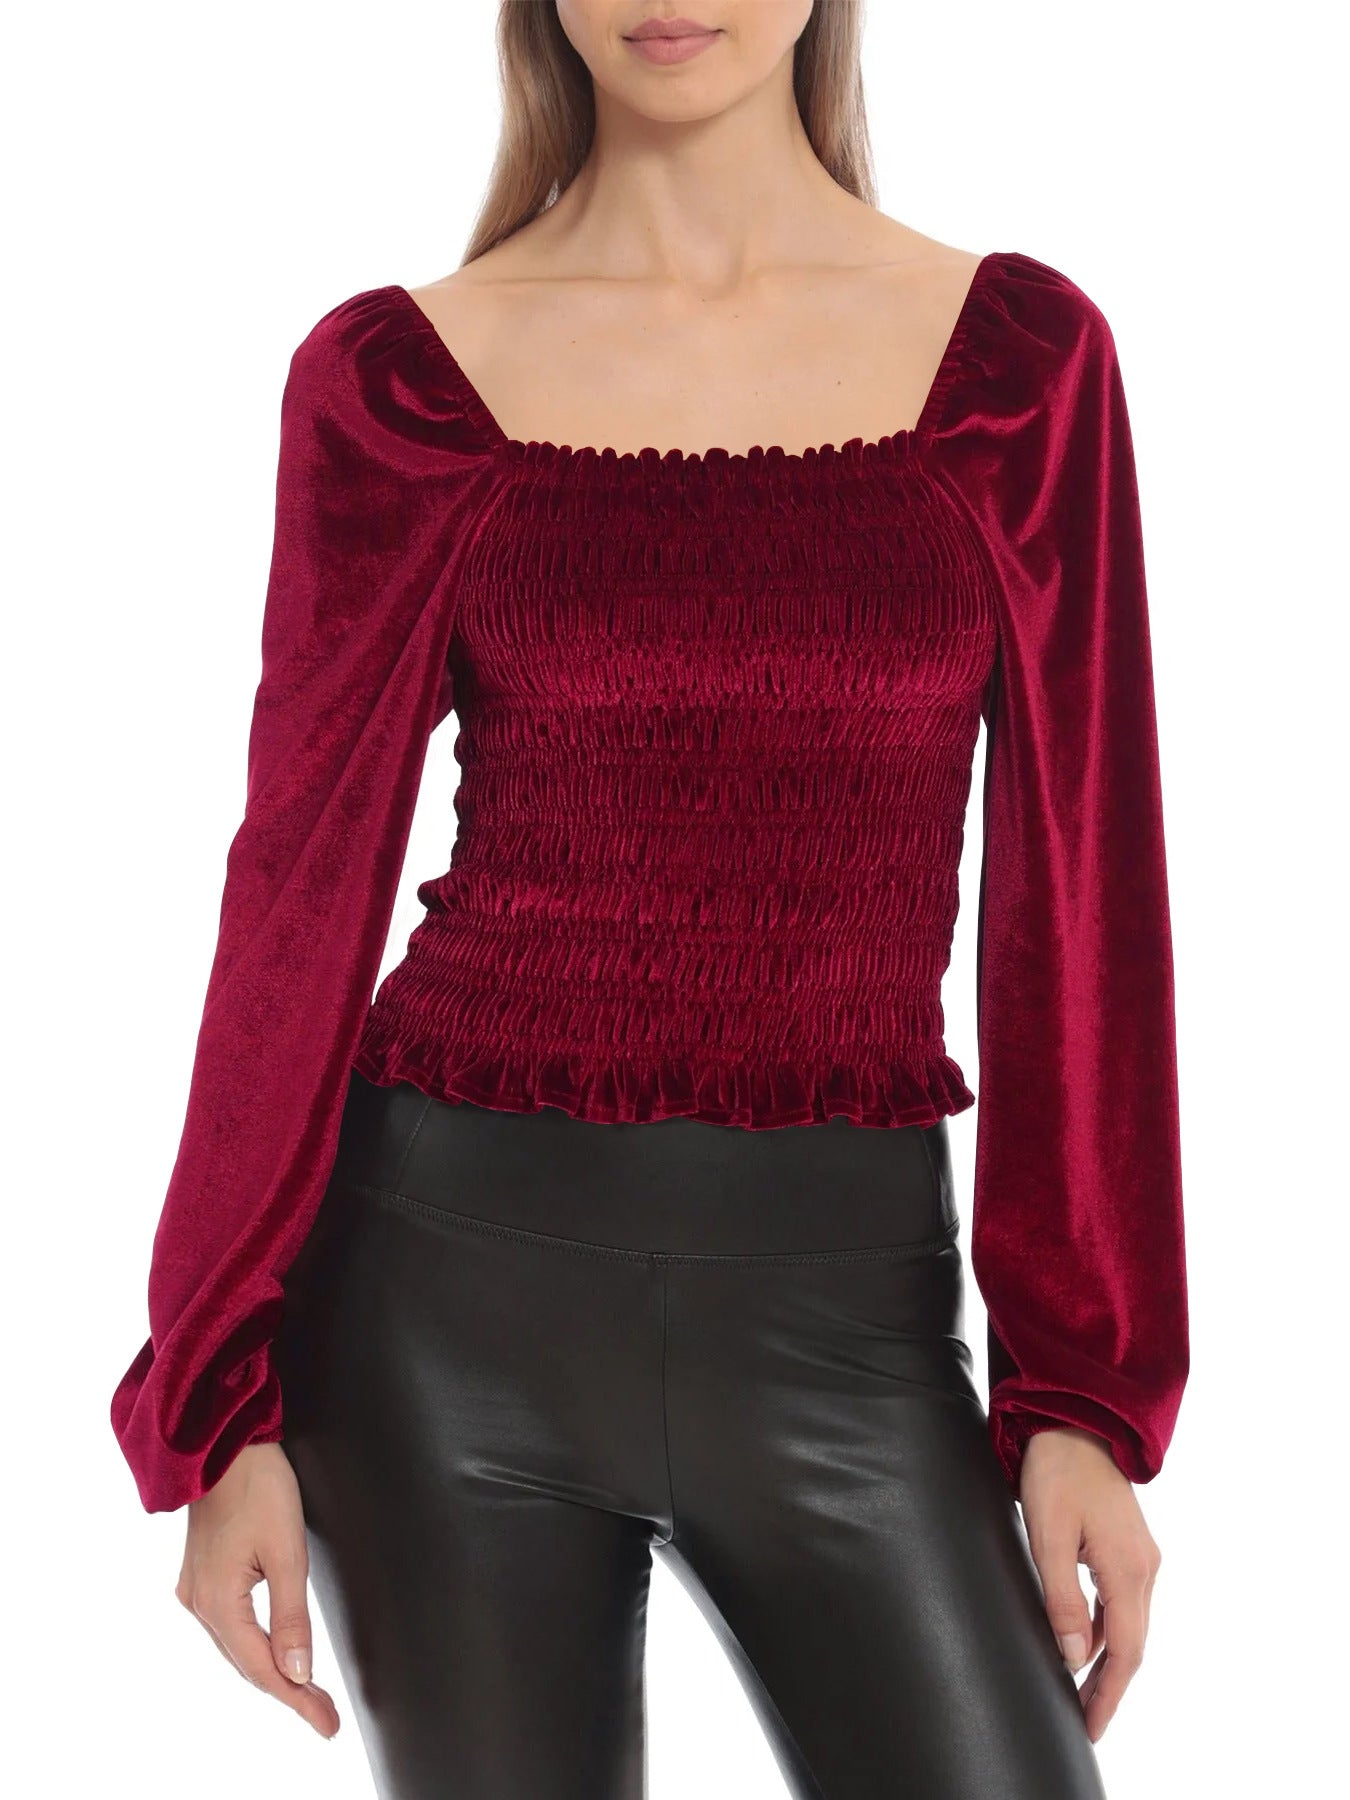 NTG Fad Red / S French elegant suede long sleeves